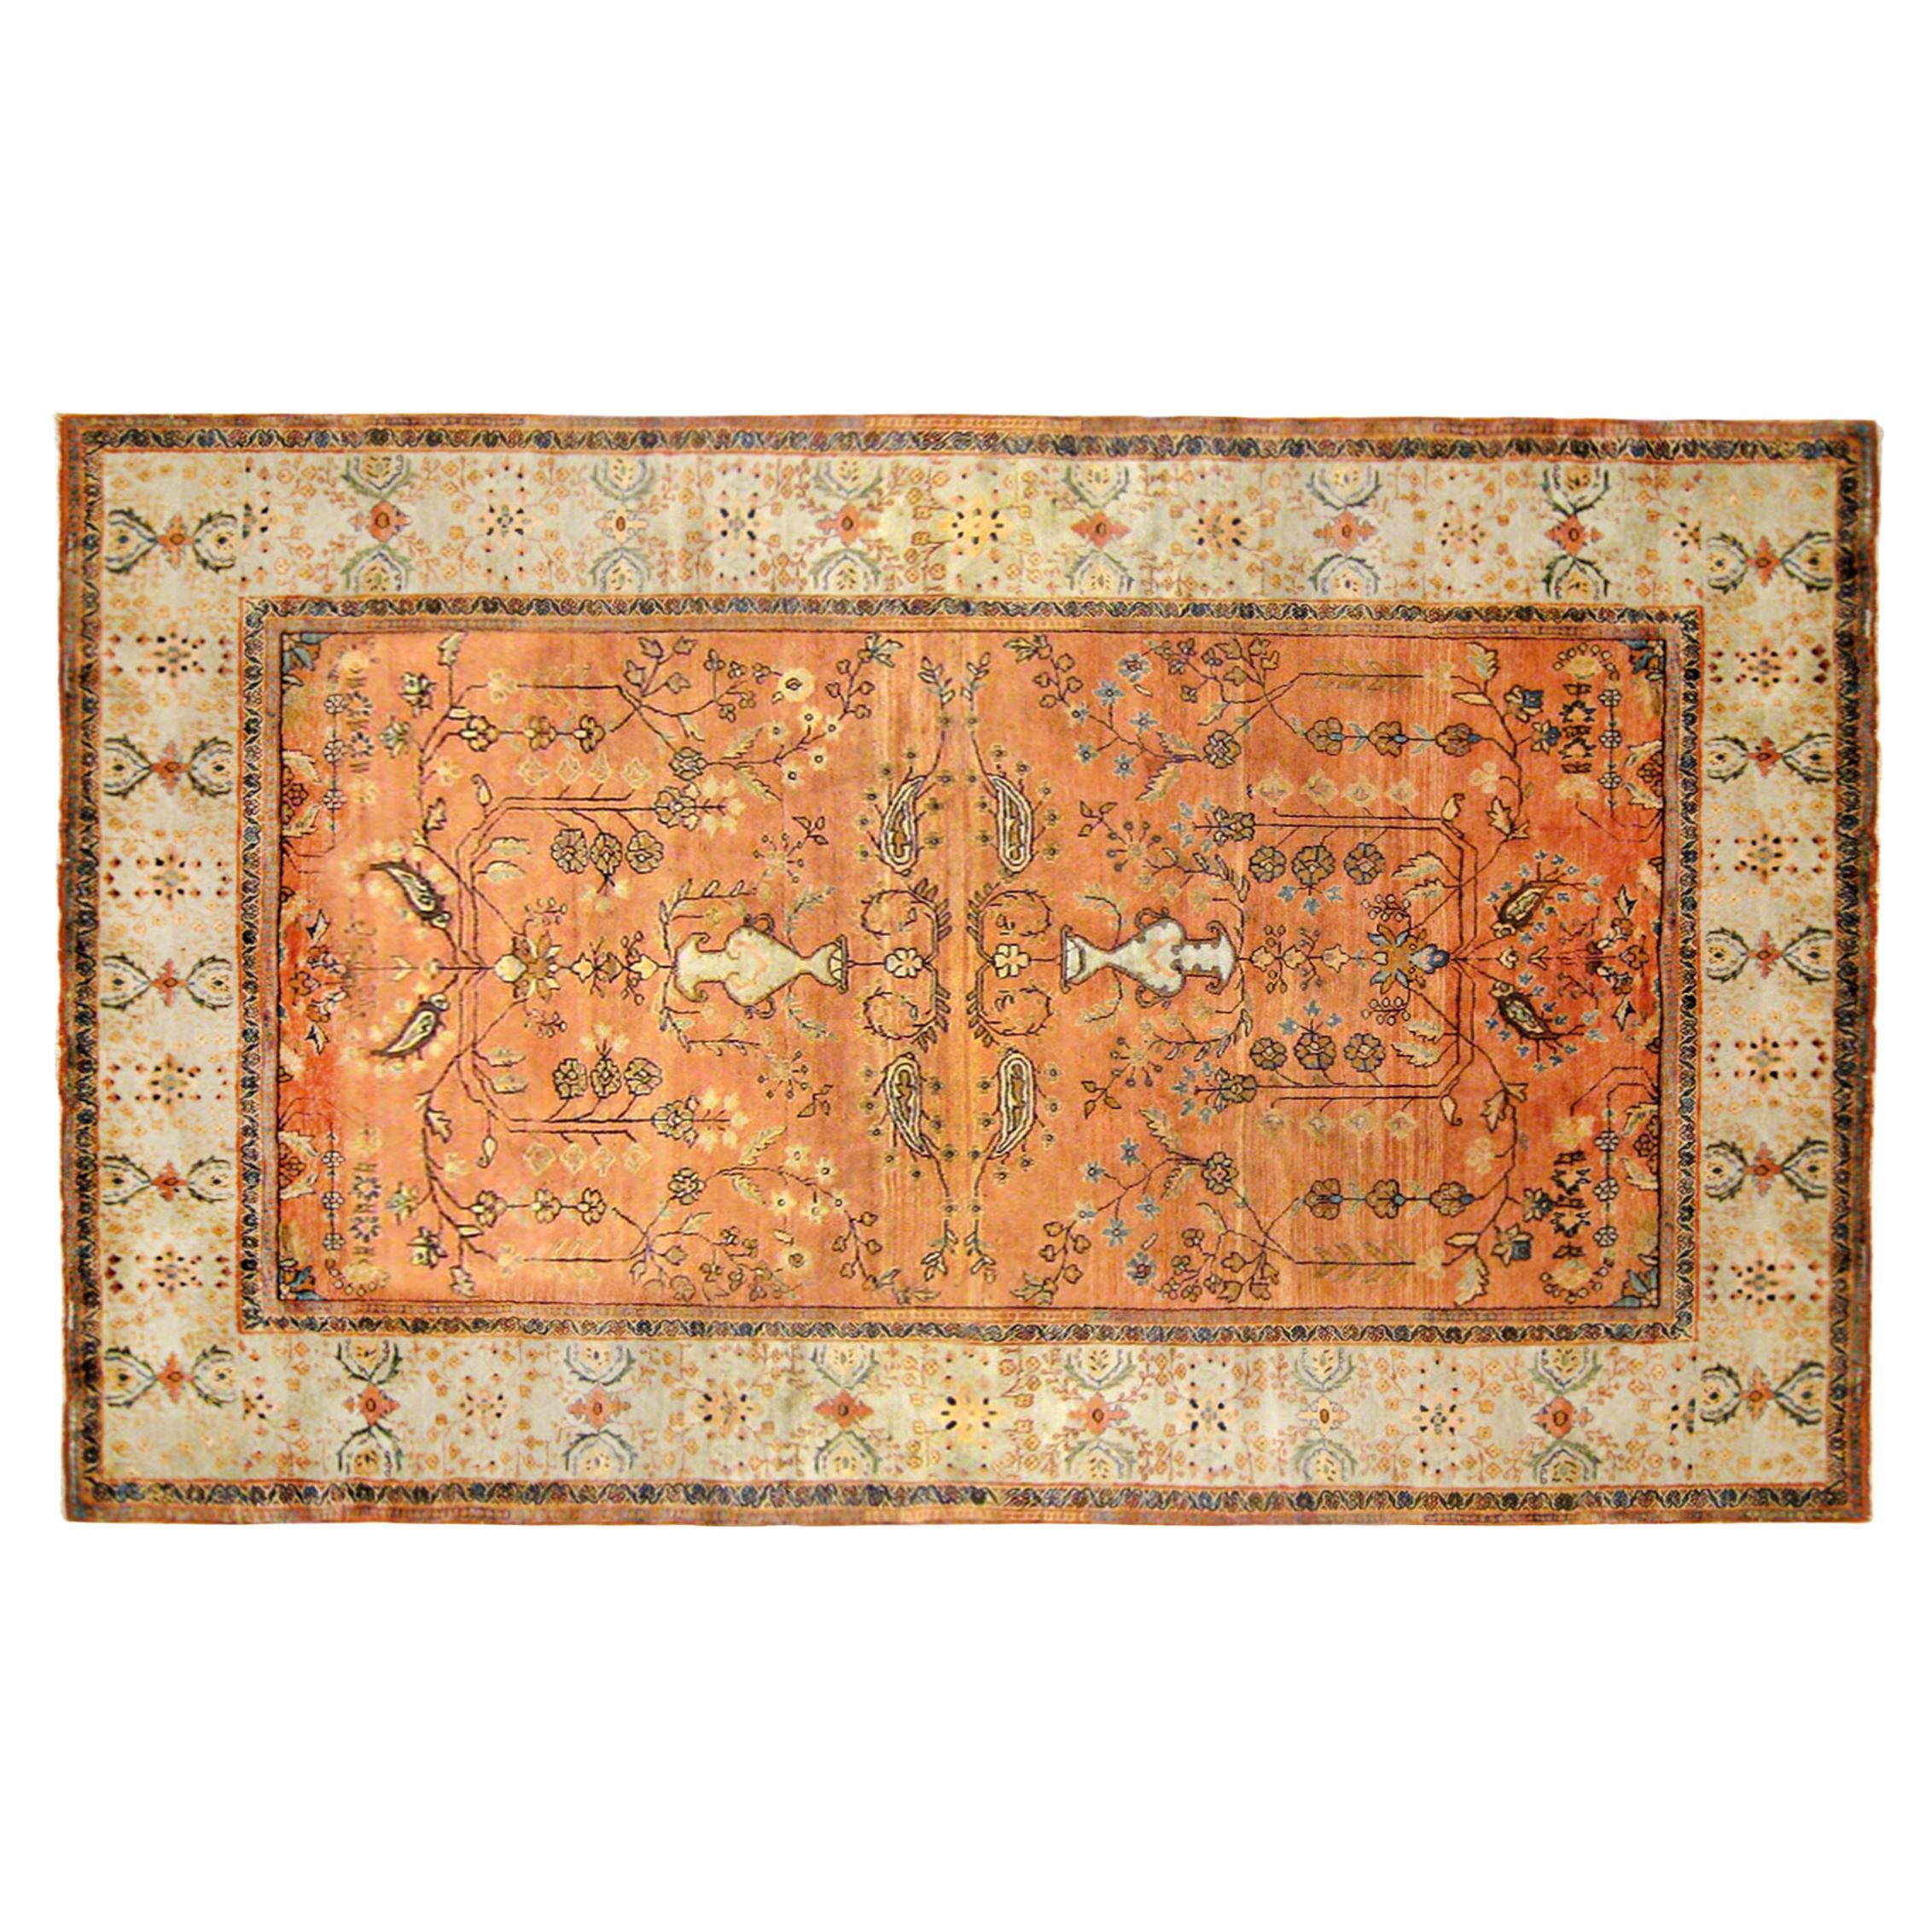 Antique Ferahan Sarouk Oriental Rug, in Room Size, with Floral Design